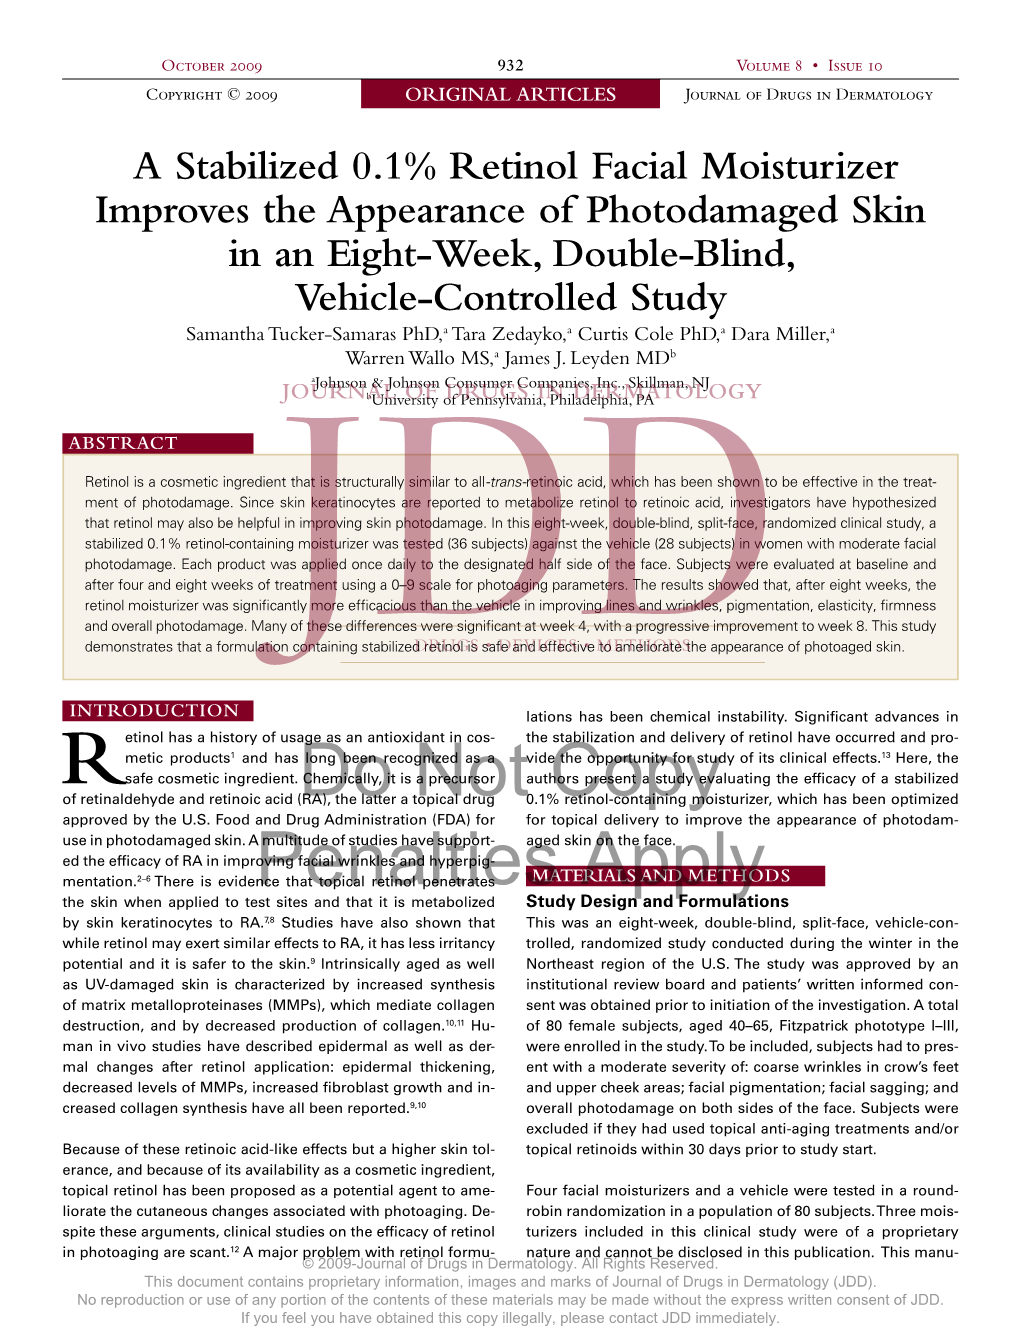 A Stabilized 0.1% Retinol Facial Moisturizer Improves the Appearance of Photodamaged Skin in an Eight-Week, Double-Blind